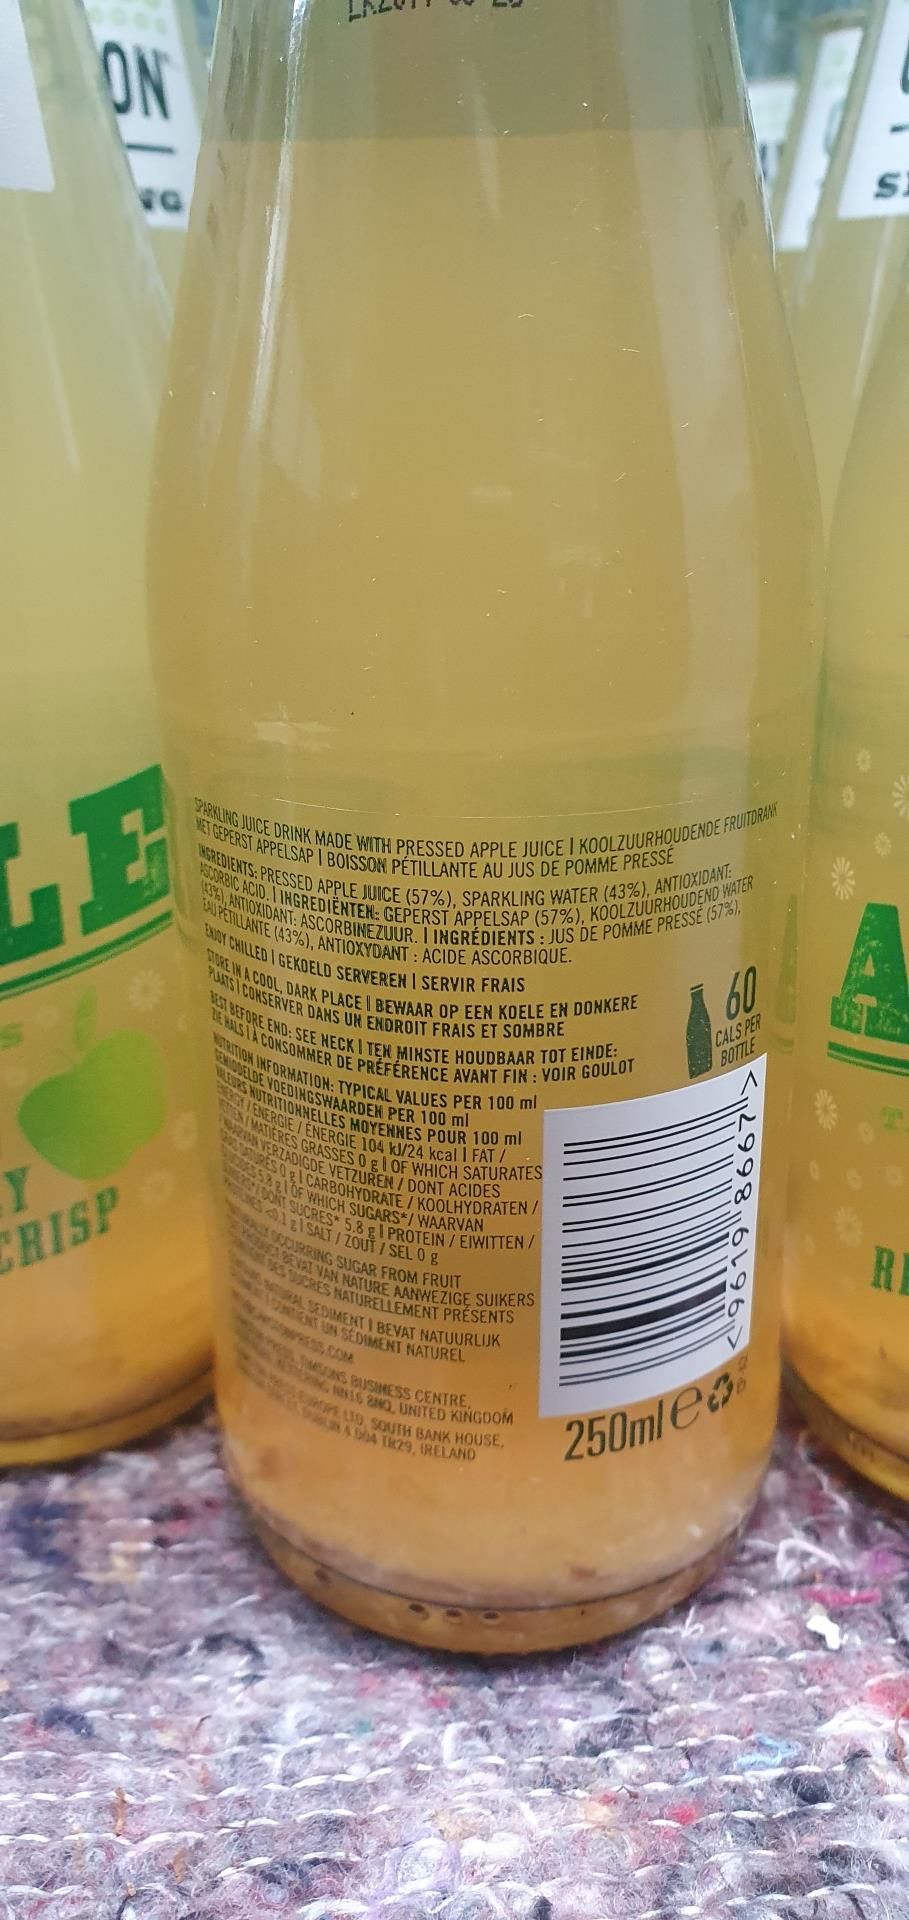 80 x Bottles of Cawston Press 250ml Sparkling Apple and Lemonade Drinks - Ref: TCH218 - CL840 - - Image 5 of 7